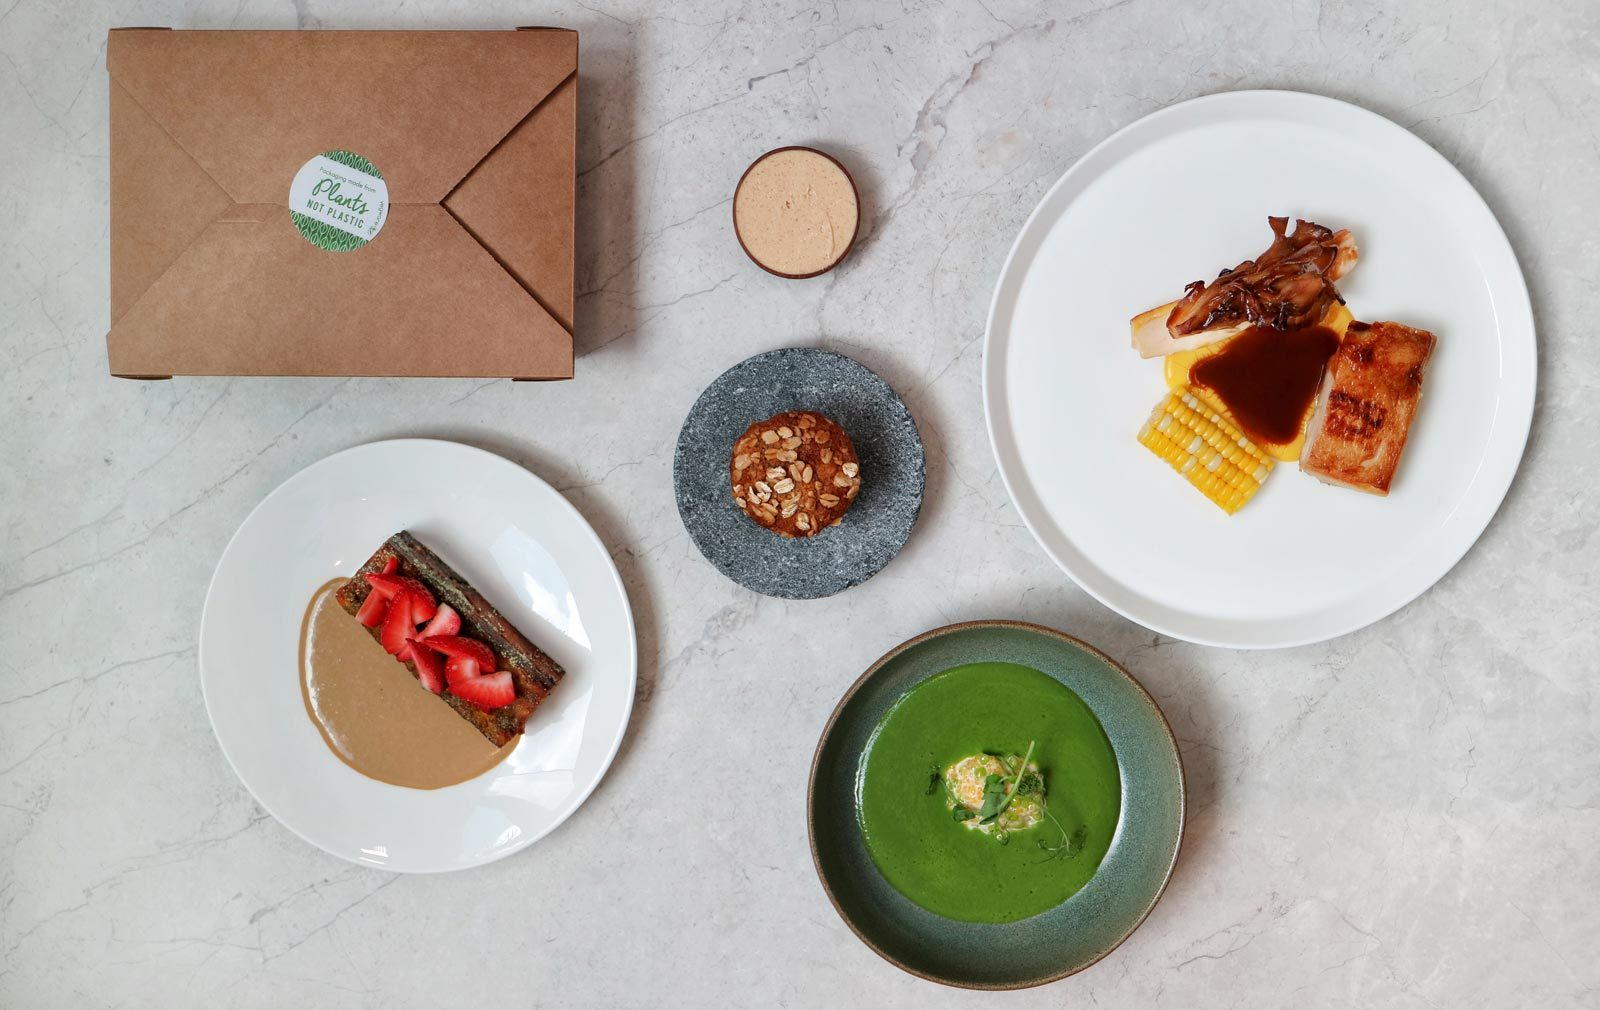 Simon Rogan at Home promotion from Roganic, featuring fresh pea soup with pike perch and pea salad, and staples like soda bread and roast pork shoulder